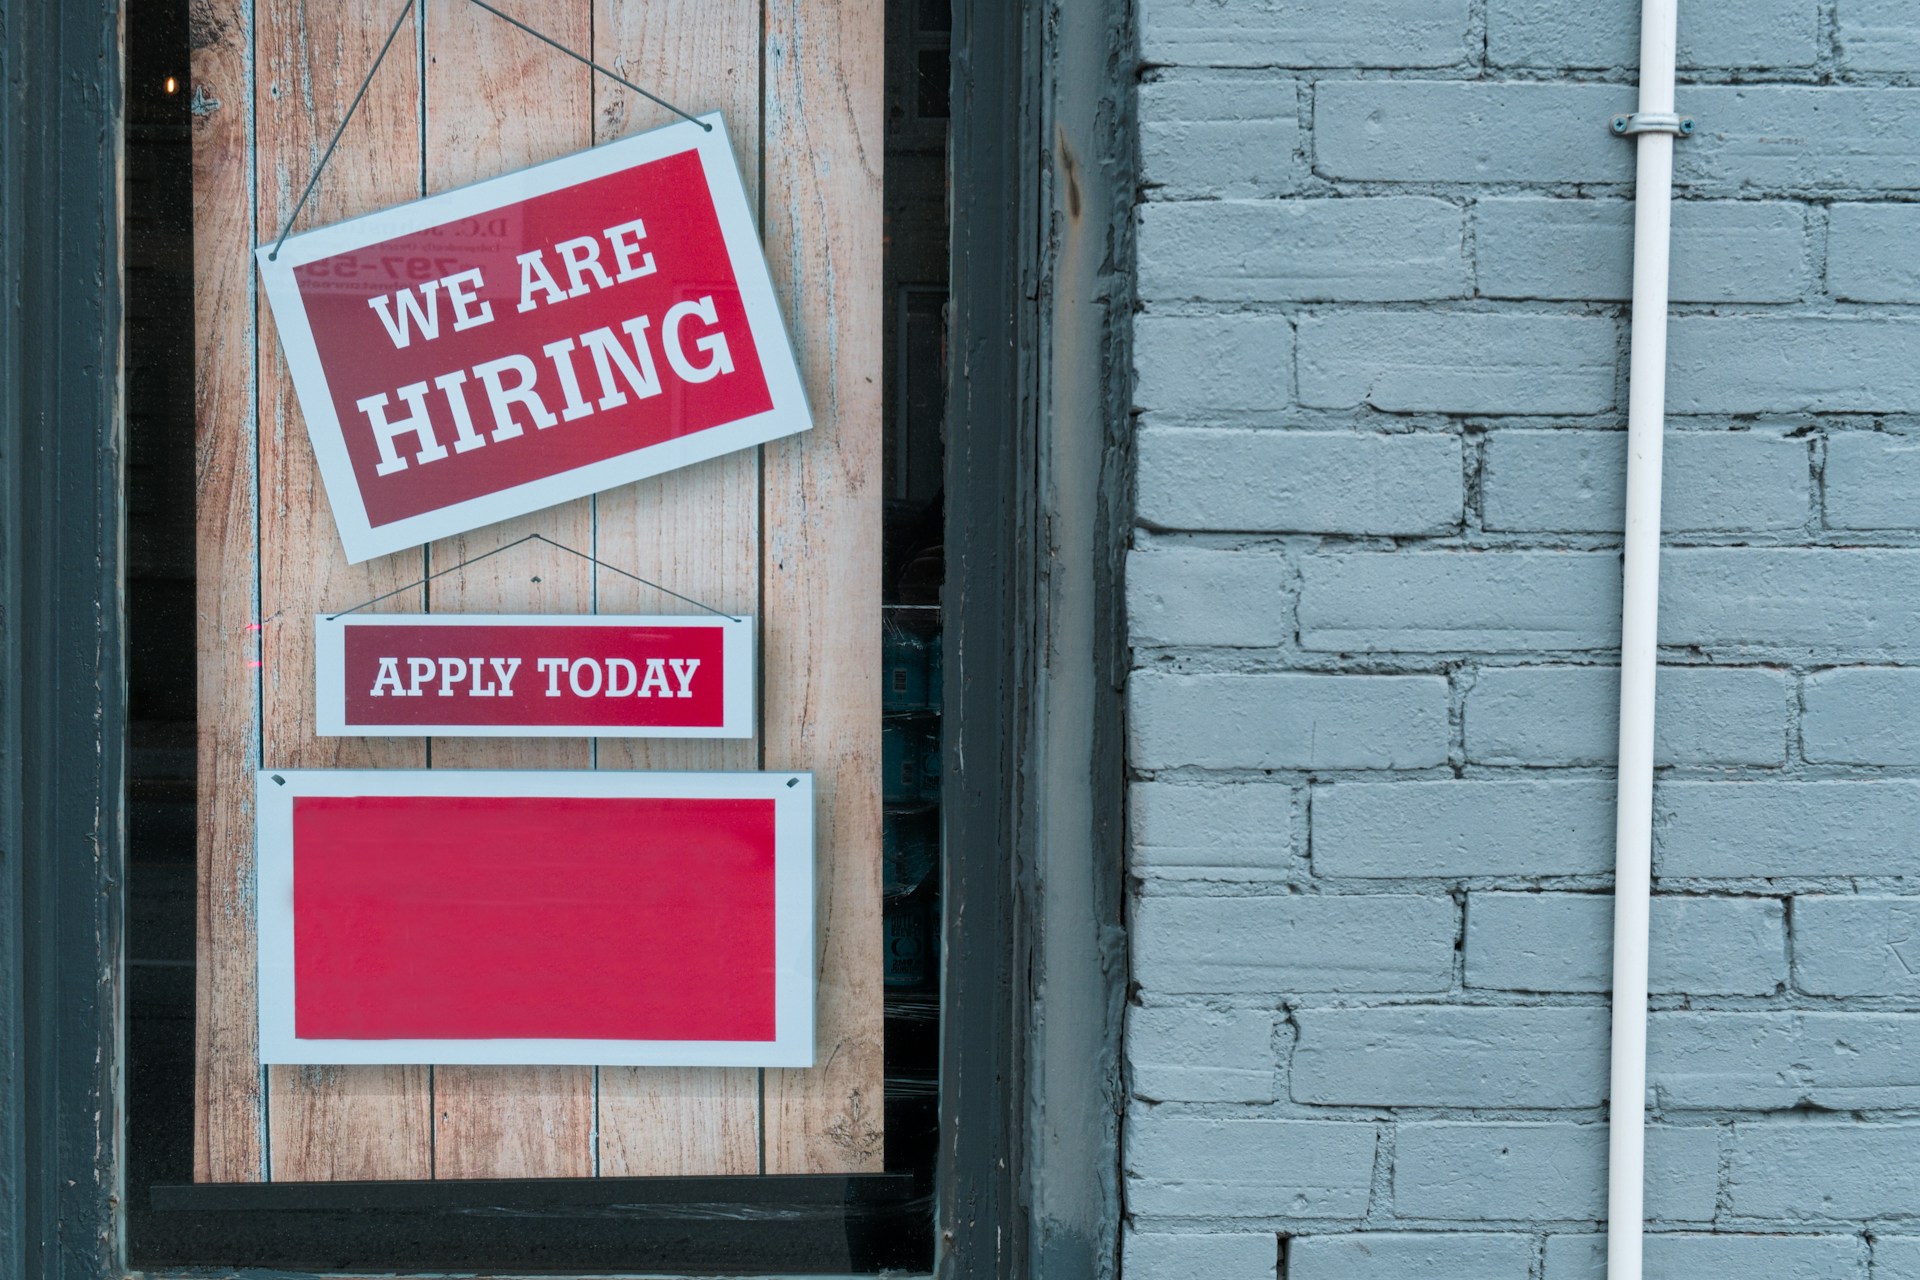 Image of a red sign in a window that says "We are hiring. Apply today."